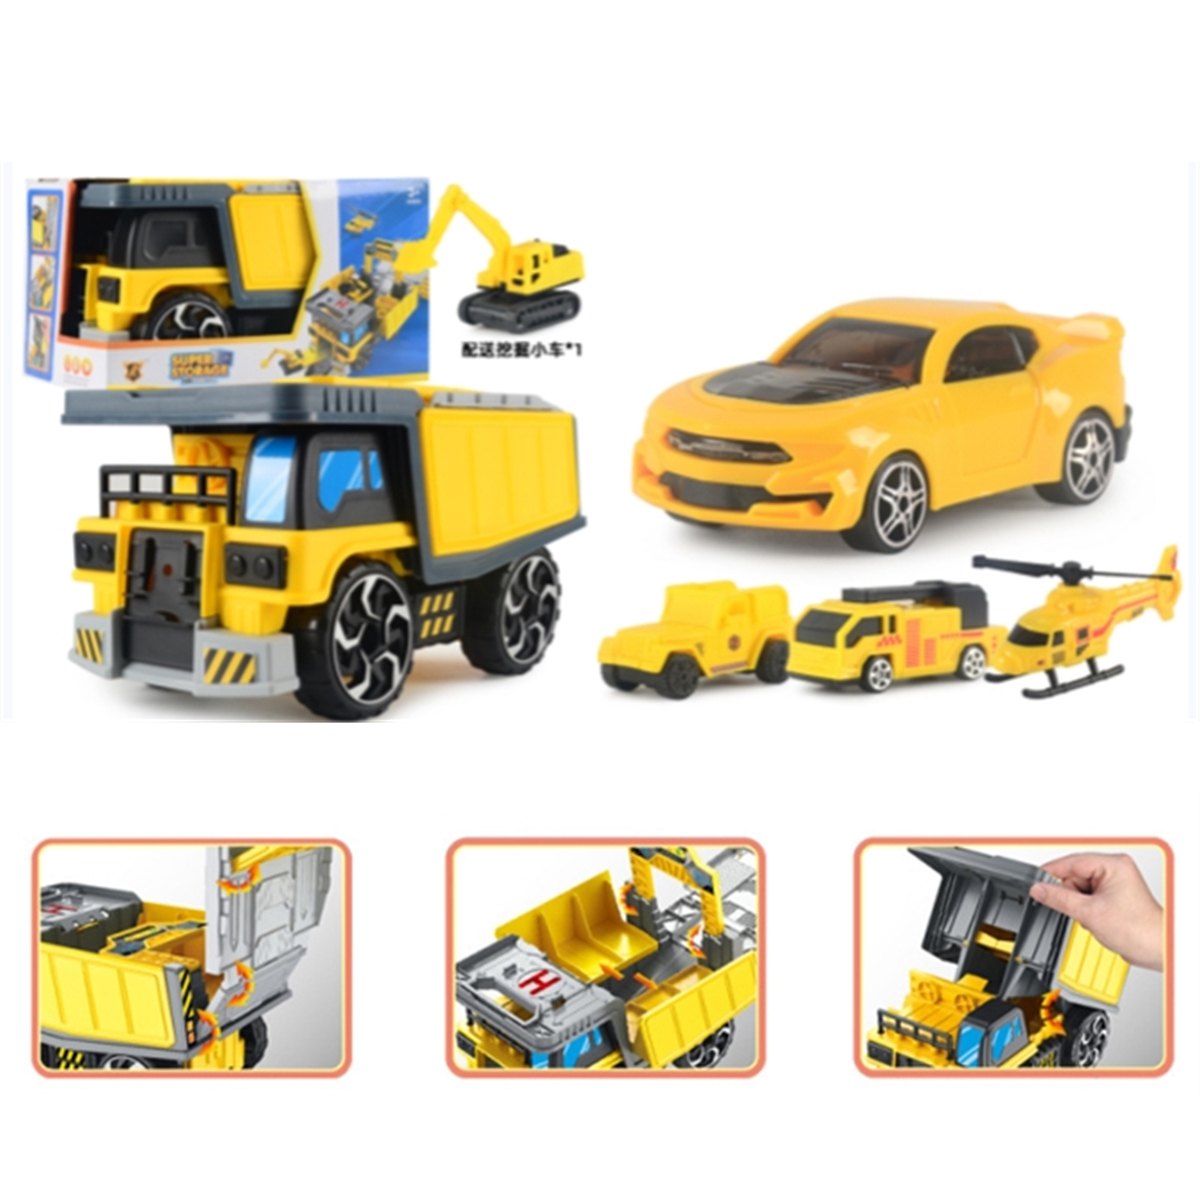 Simulation-Inertia-Deformation-Track-Engineering-Vehicle-Diecast-Car-Model-Toy-with-Storage-Parking--1788624-8